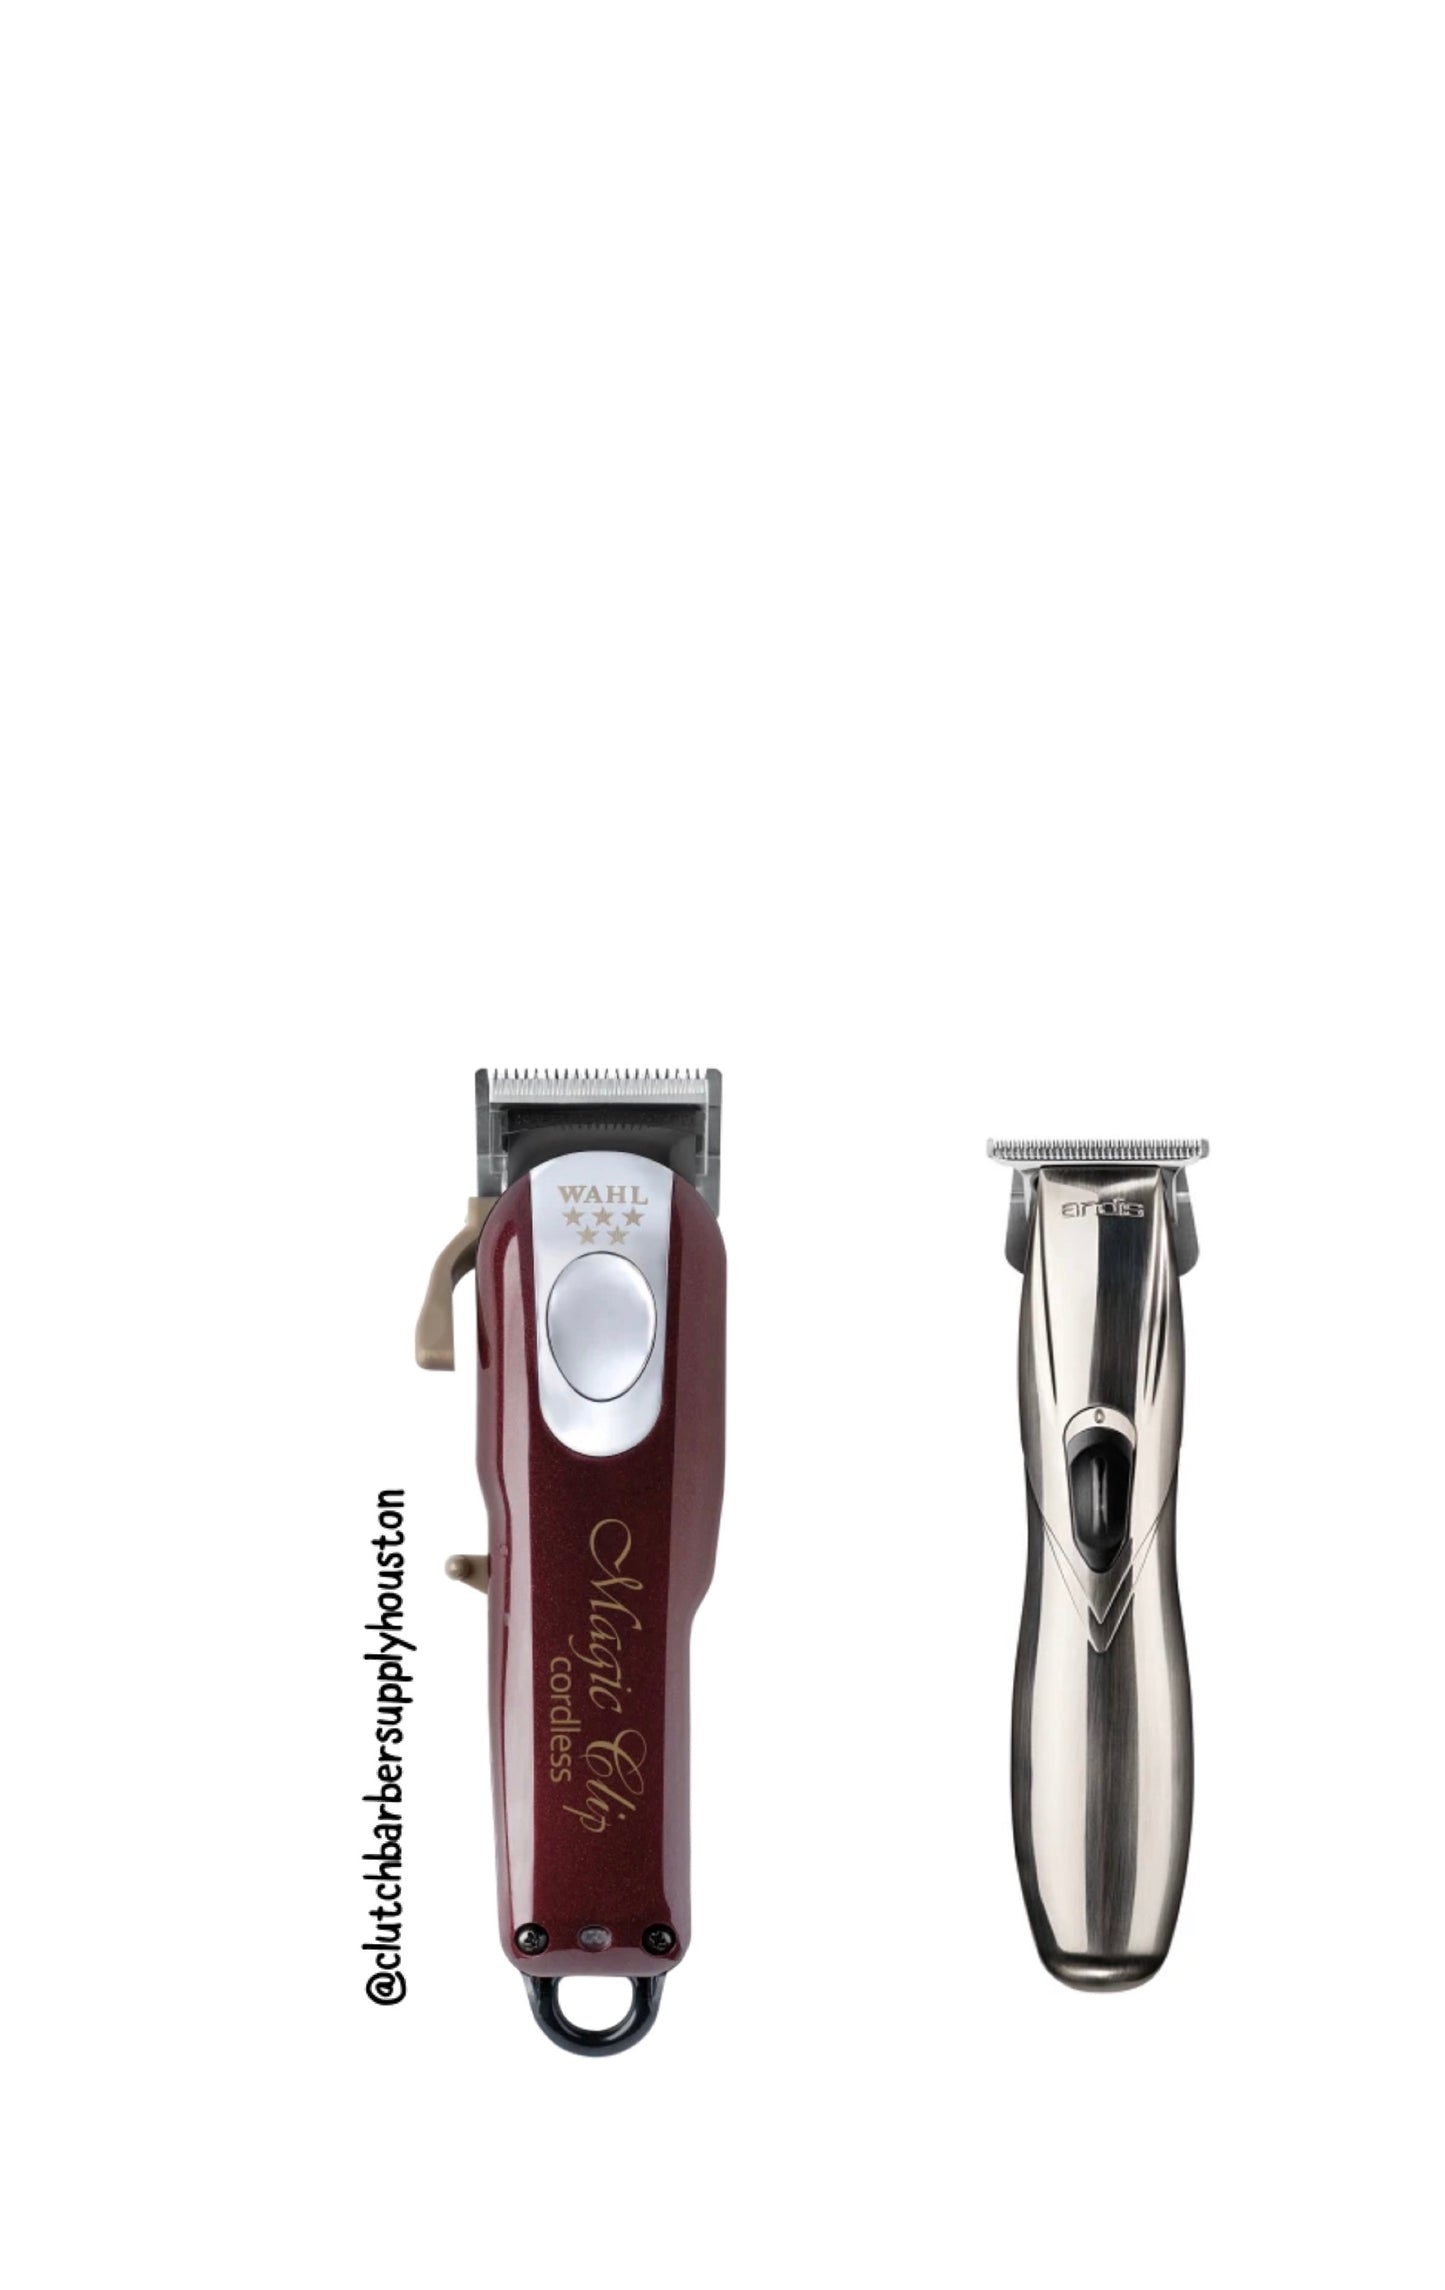 Wahl cordless magic clip and Andis Slimline GTX trimmer